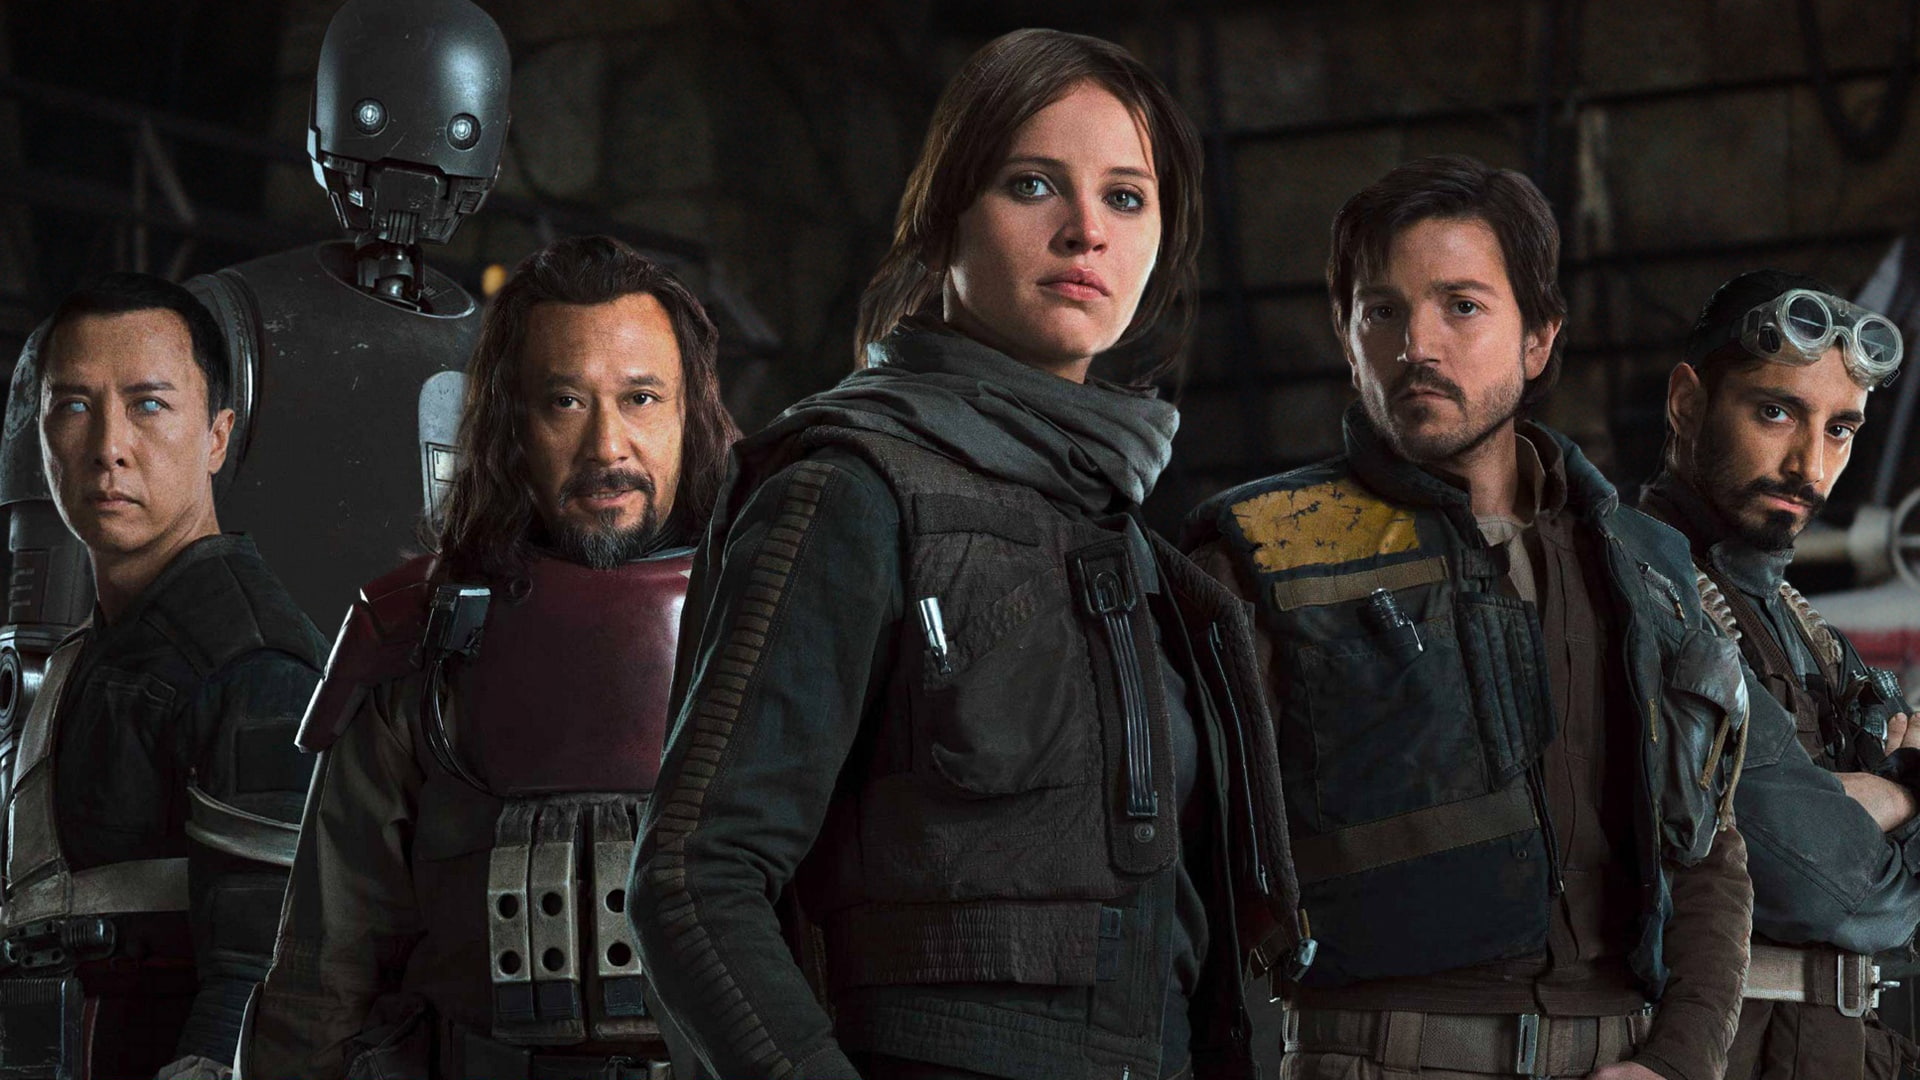 Rebels, Rogue One: A Star Wars Story, Jyn Erso